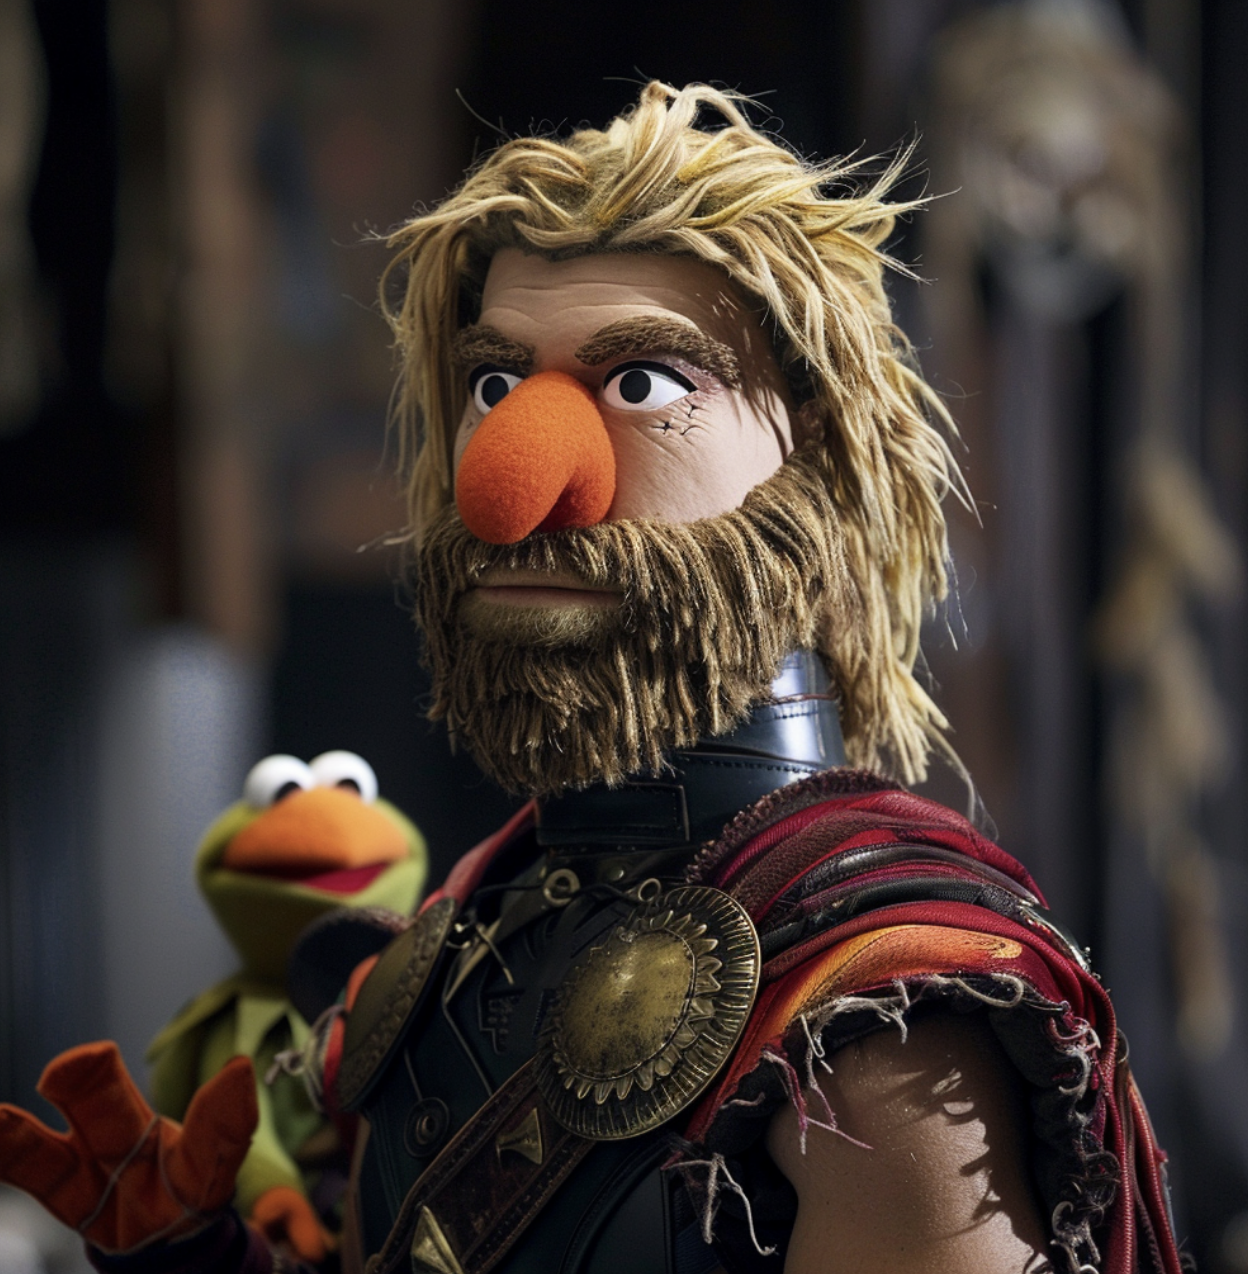 A warrior-clad Muppet resembling a Viking, with long, scraggly beard and large nose